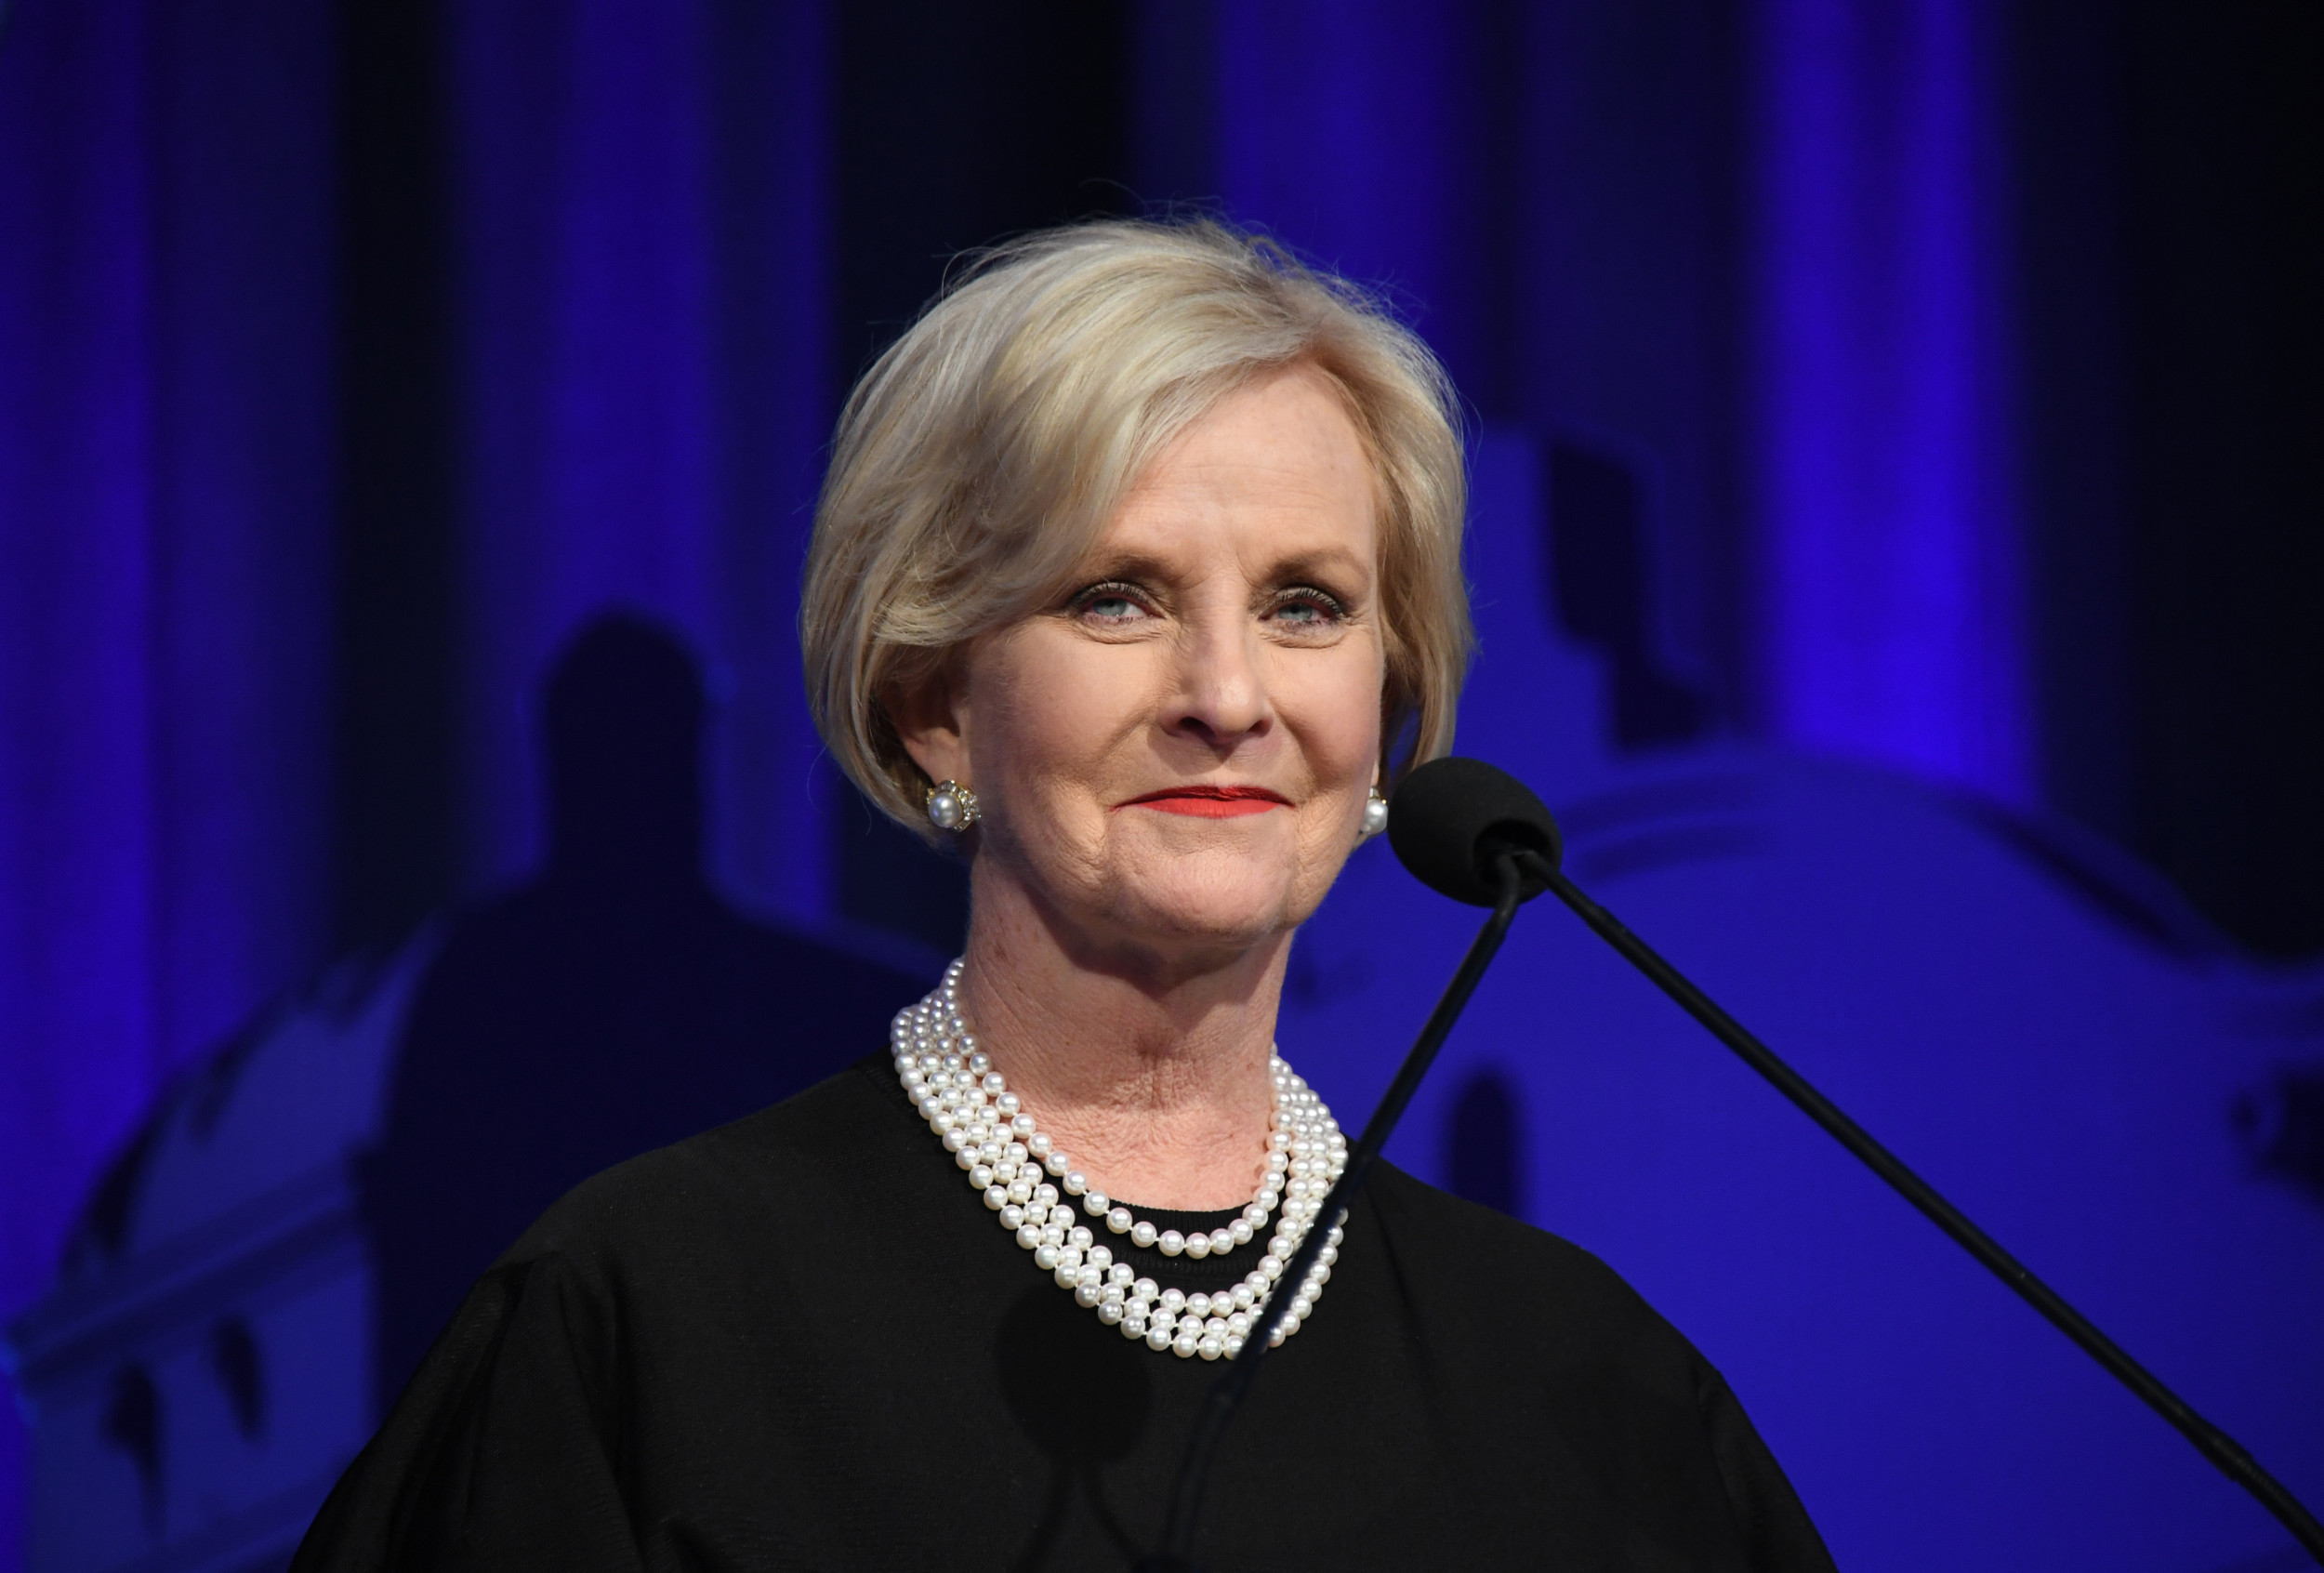 Cindy McCain Becomes Second Republican to Join Joe Biden's Transition Team